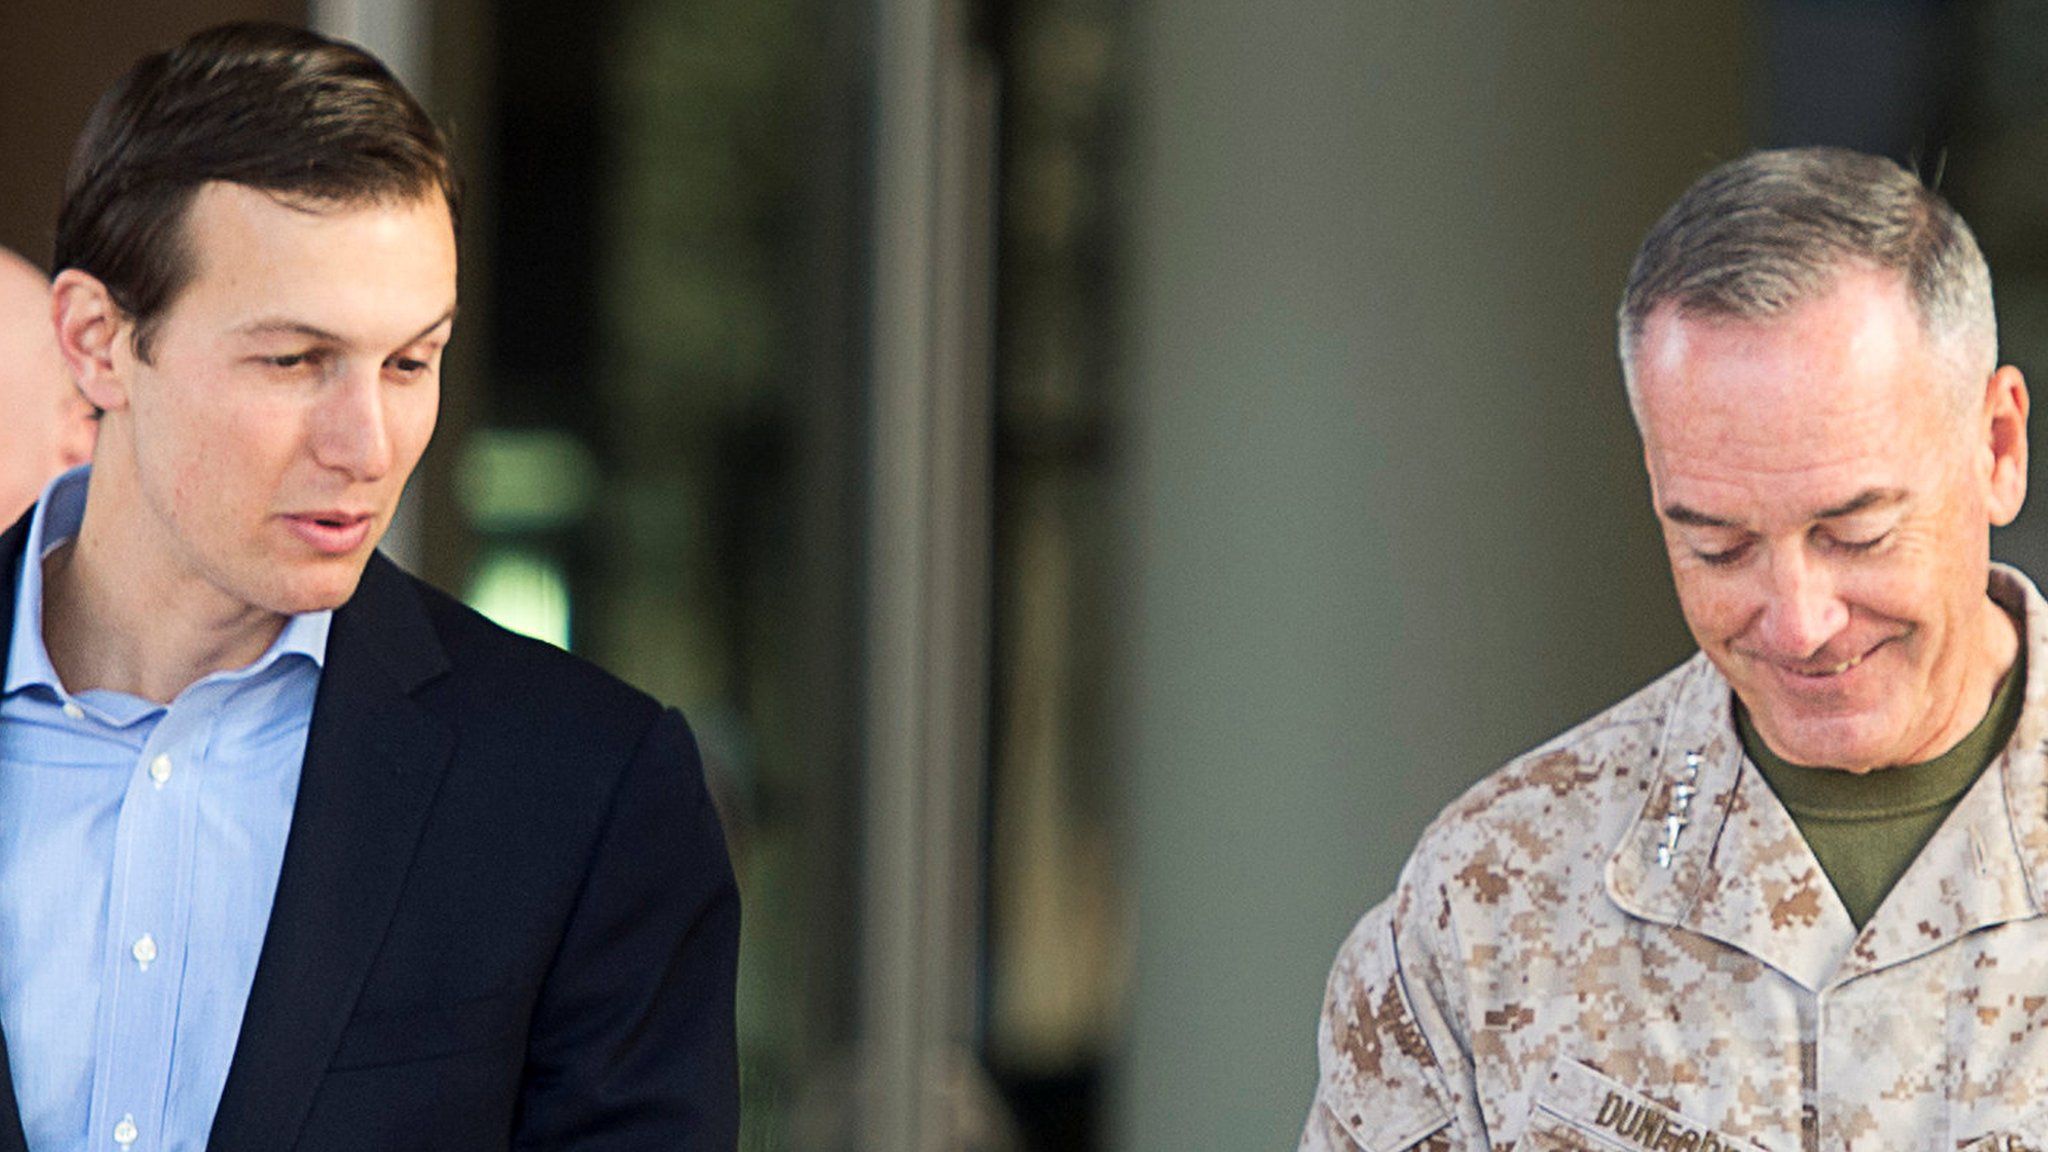 President Donald Trump's son-in-law and senior advisor Jared Kushner (L) speaks with Marine Corps General Joseph F Dunford Jr, chairman of the Joint Chiefs of Staff.